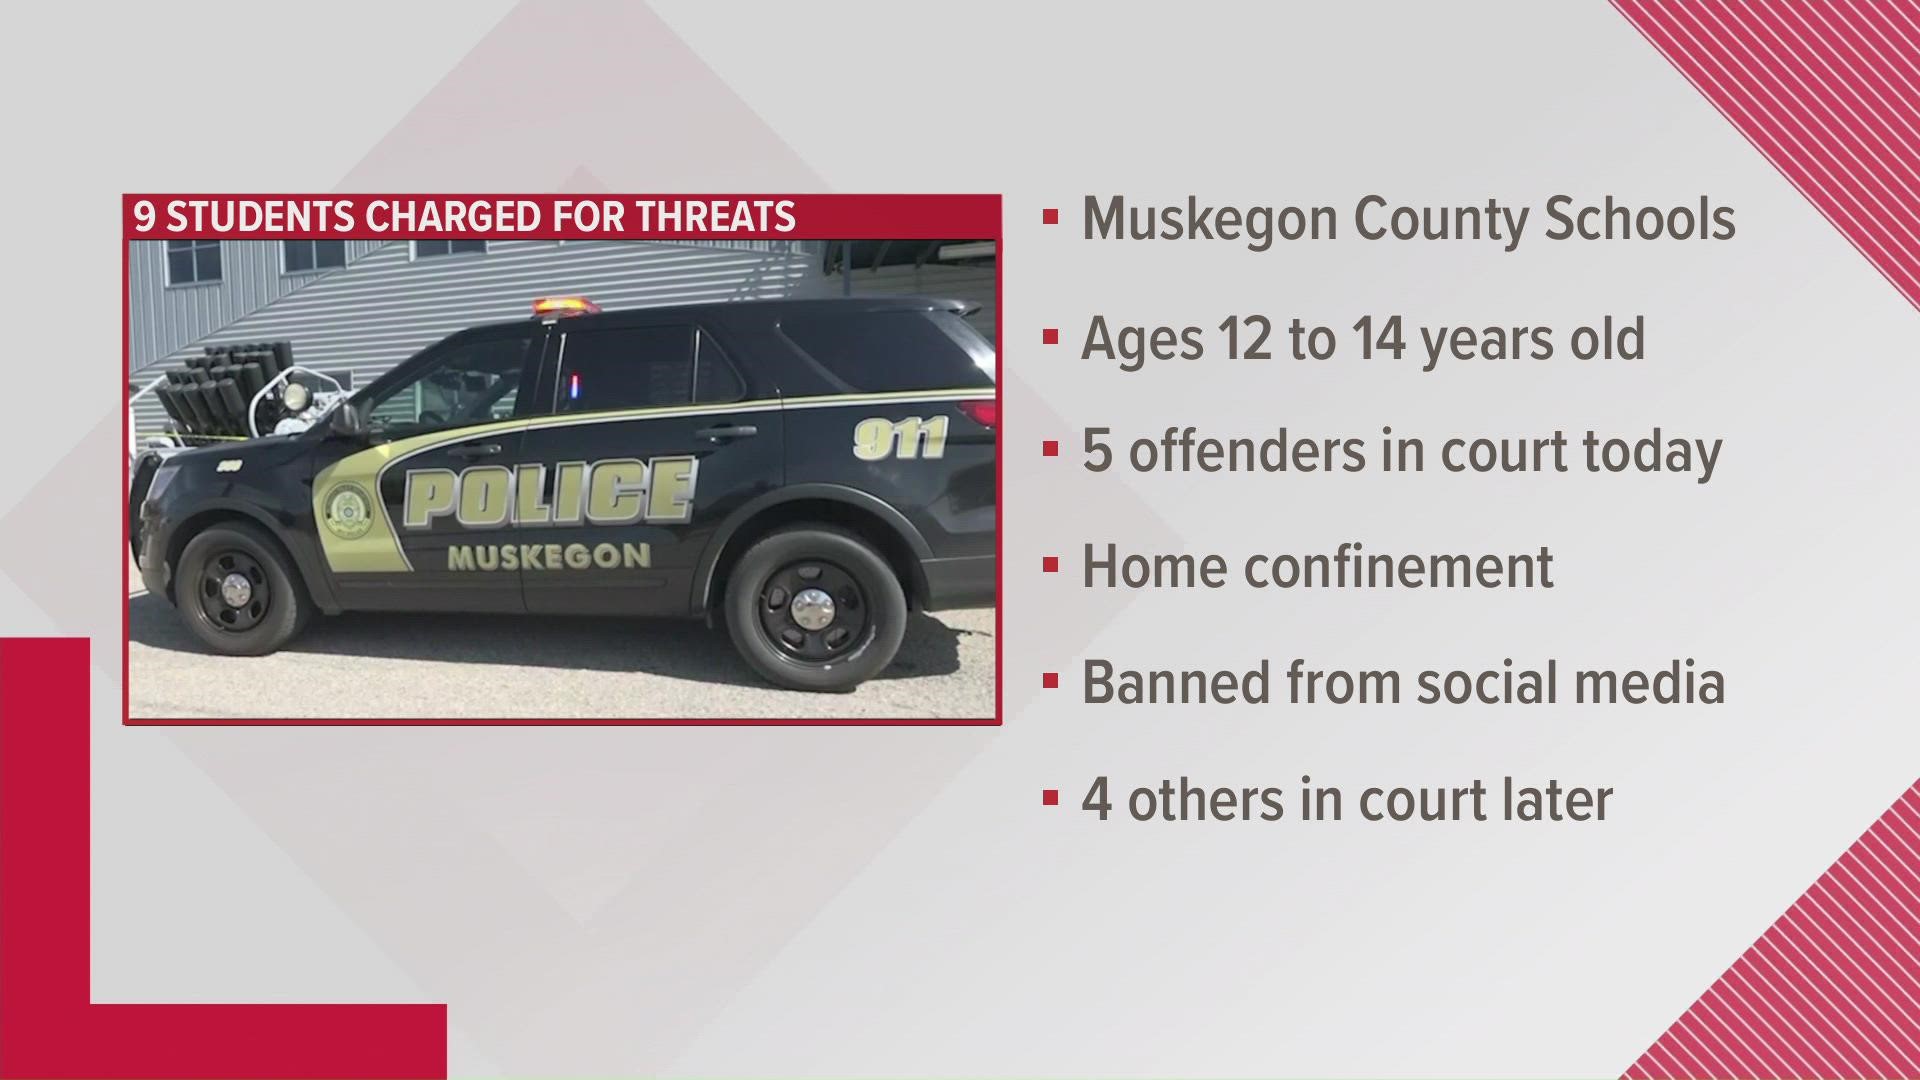 Threats occurred at Mona Shores, Muskegon, Muskegon Heights, Reeths Puffer, Oakridge and Whitehall.